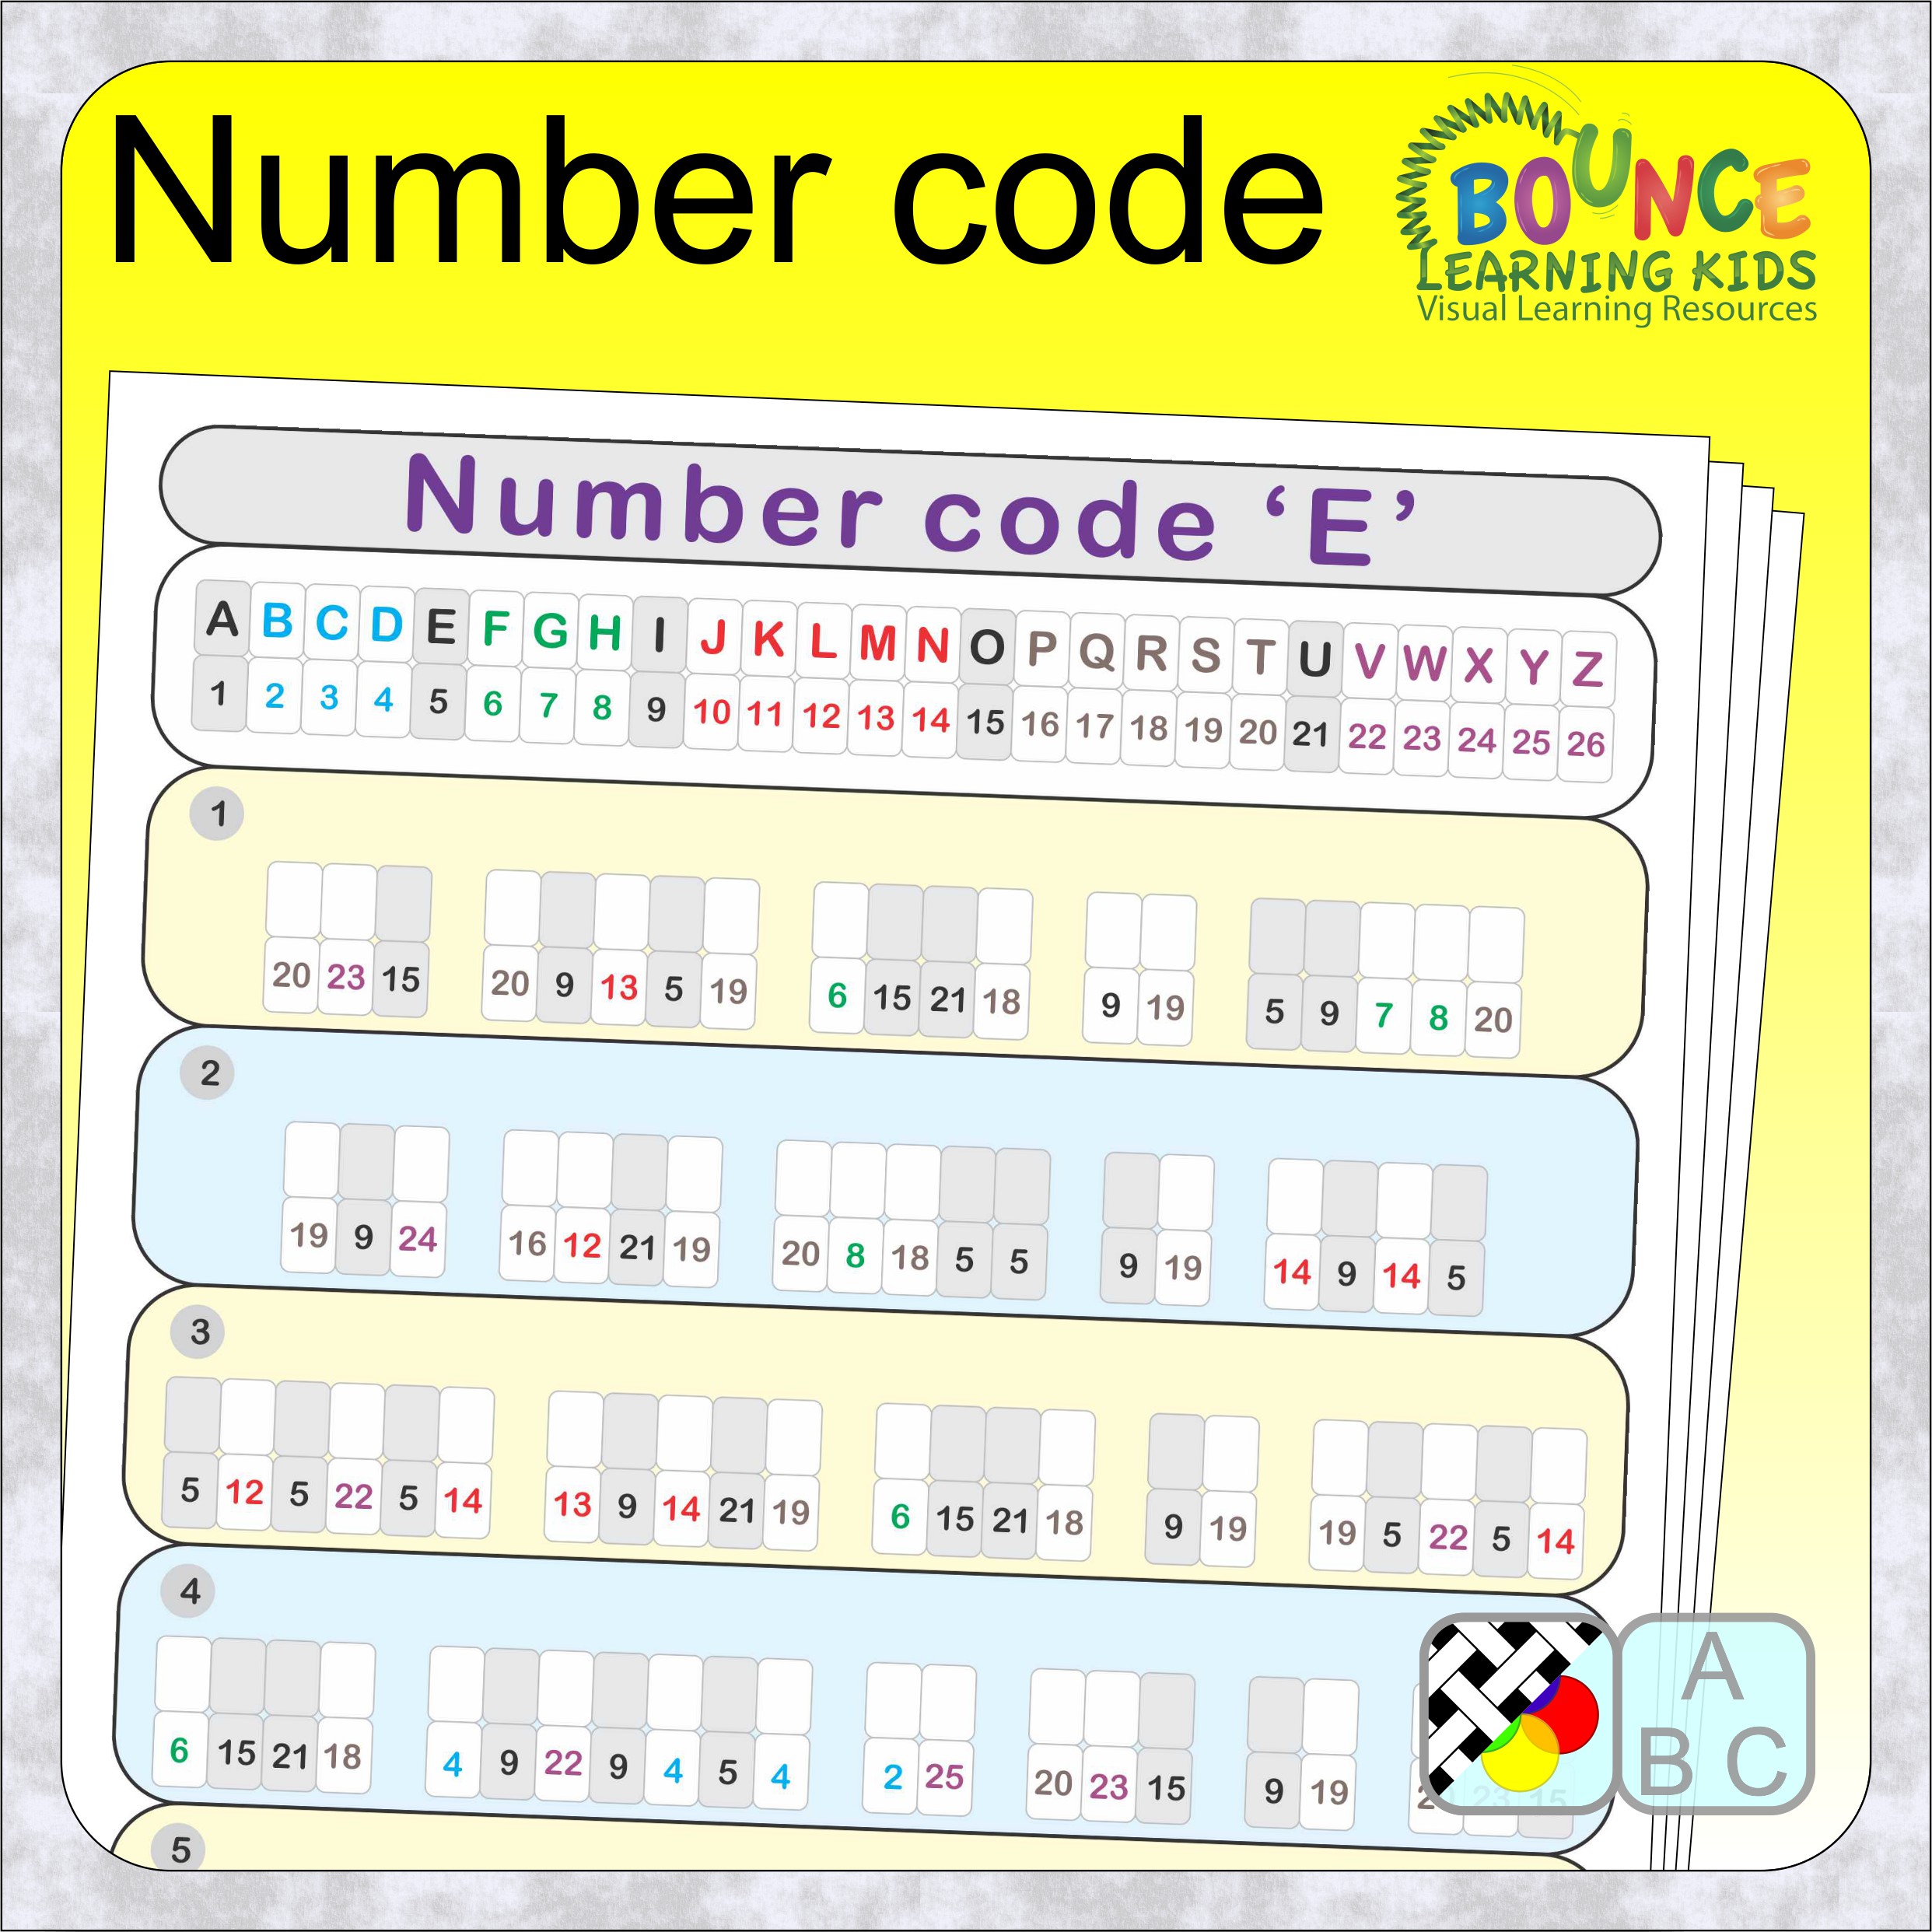 Esl Worksheets Alphabet And Numbers Coding